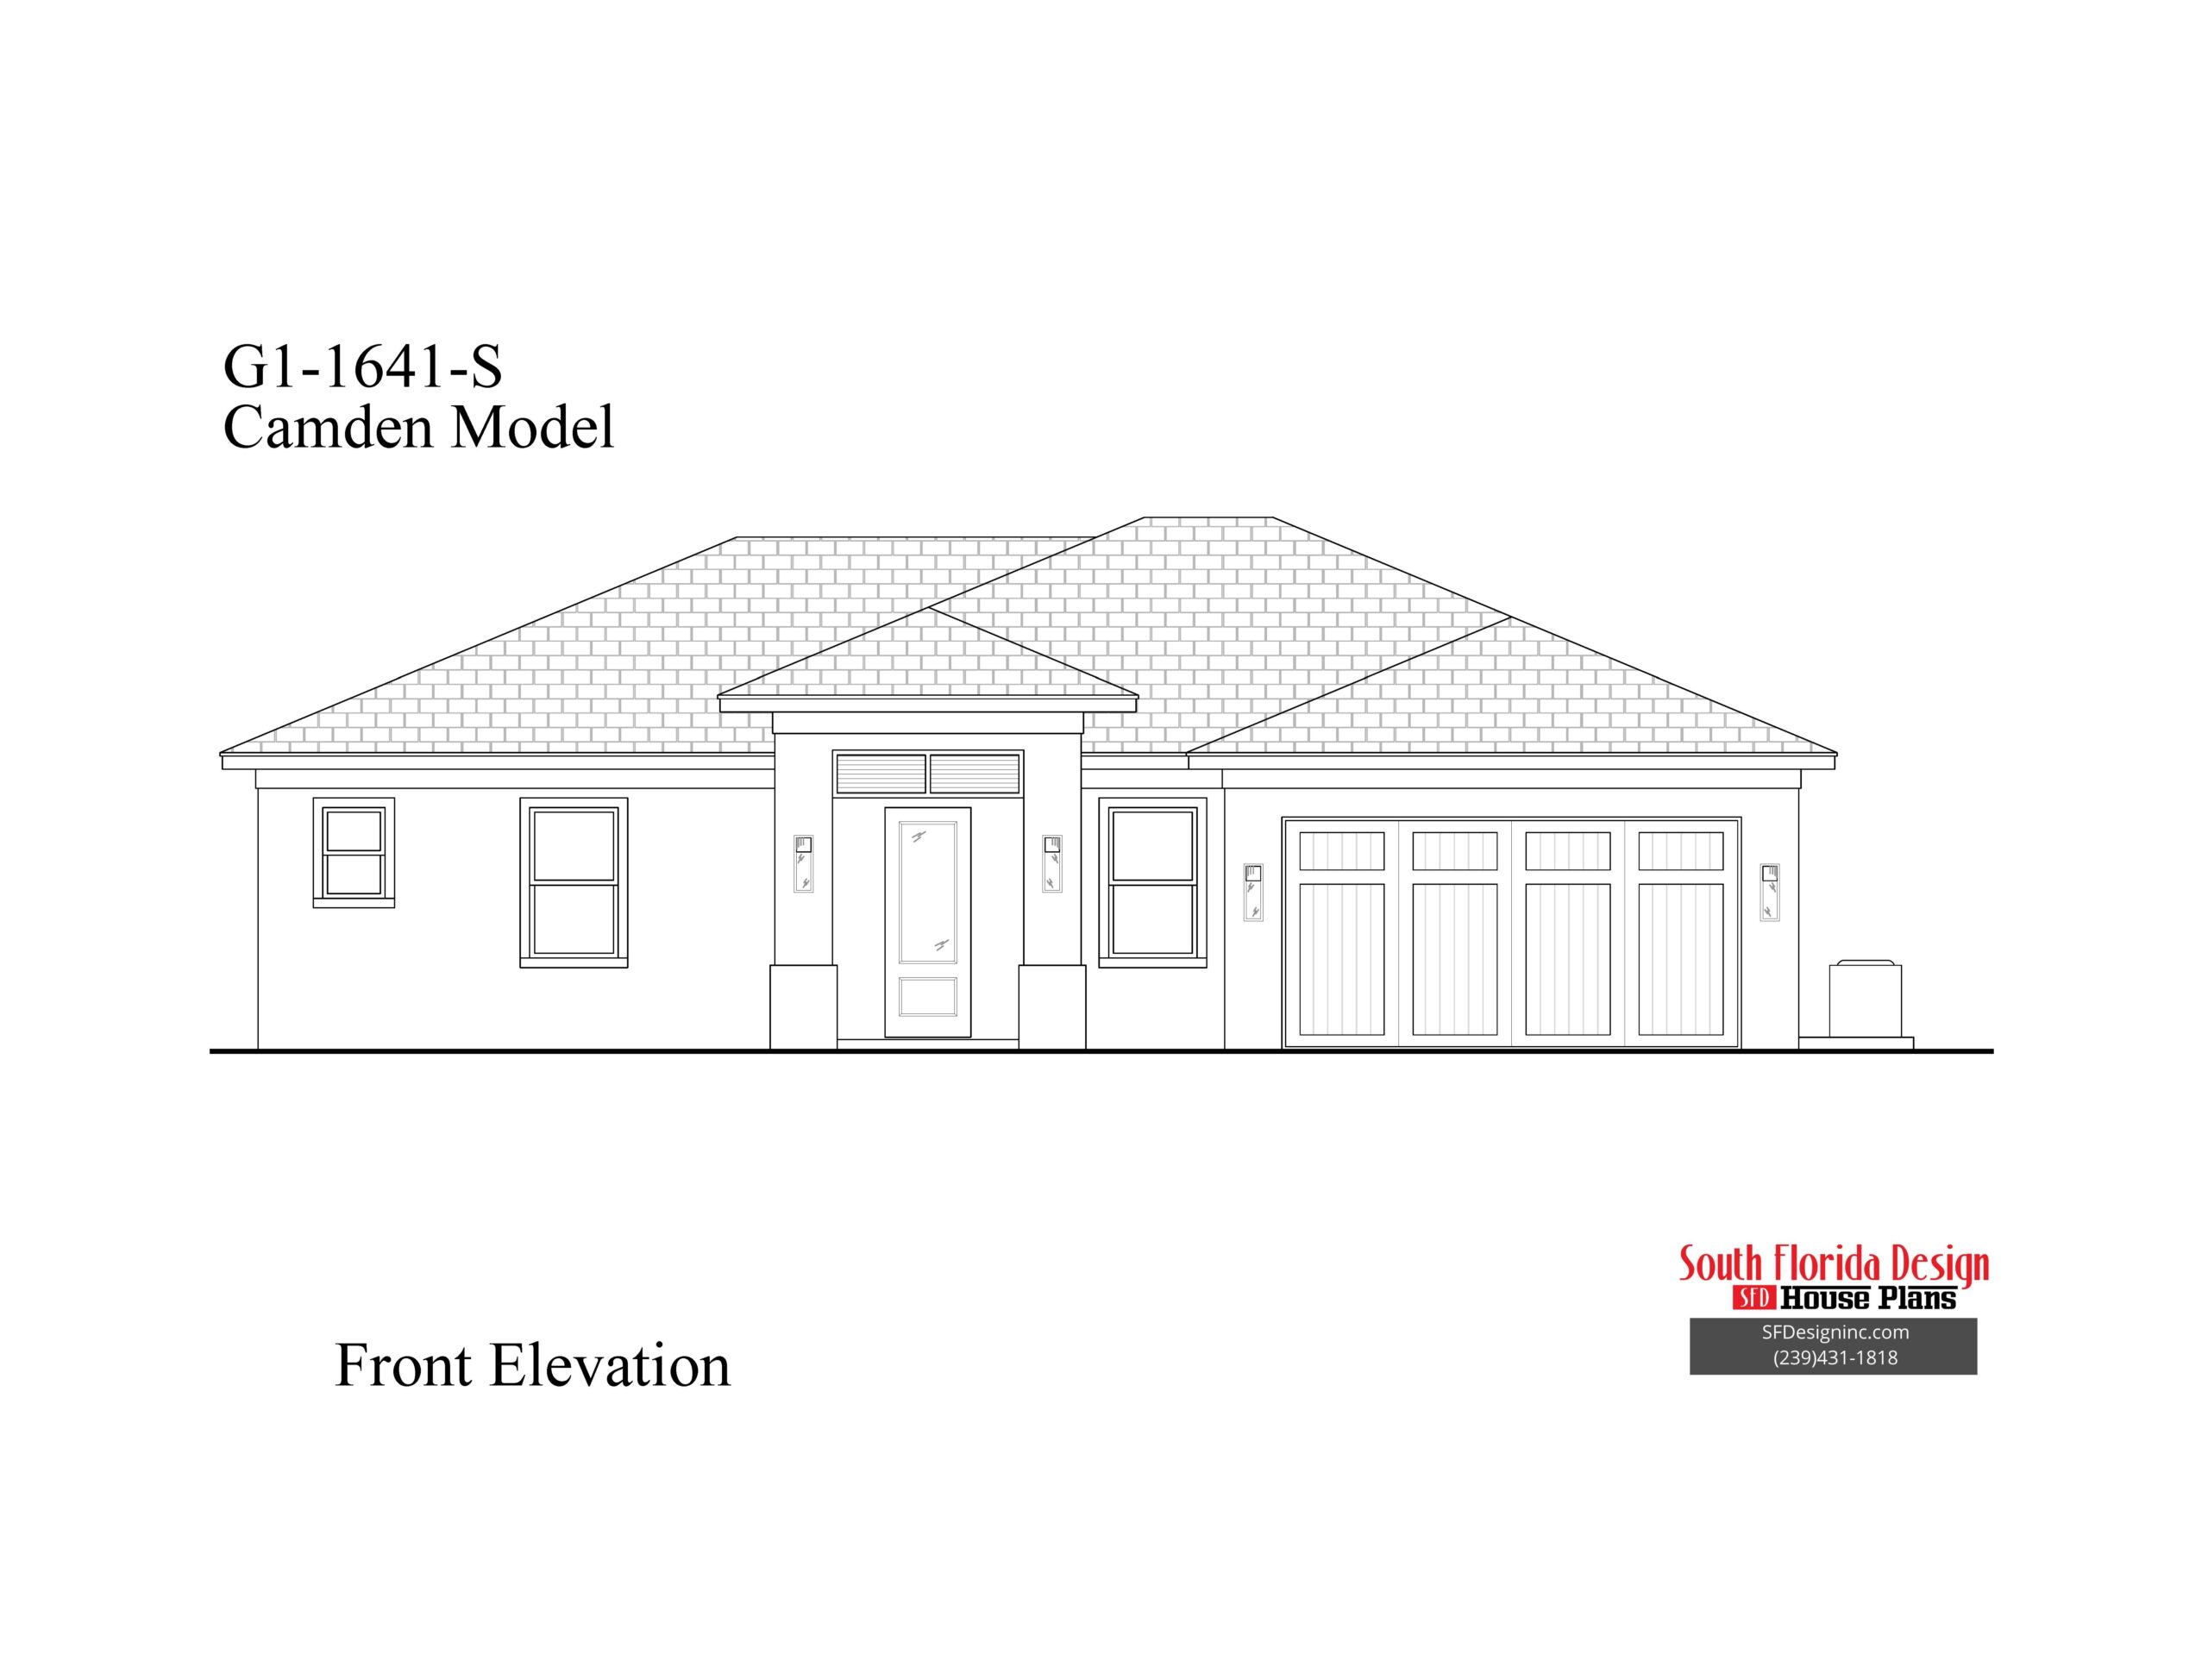 Black and white front elevation sketch of a 1641sf house plan